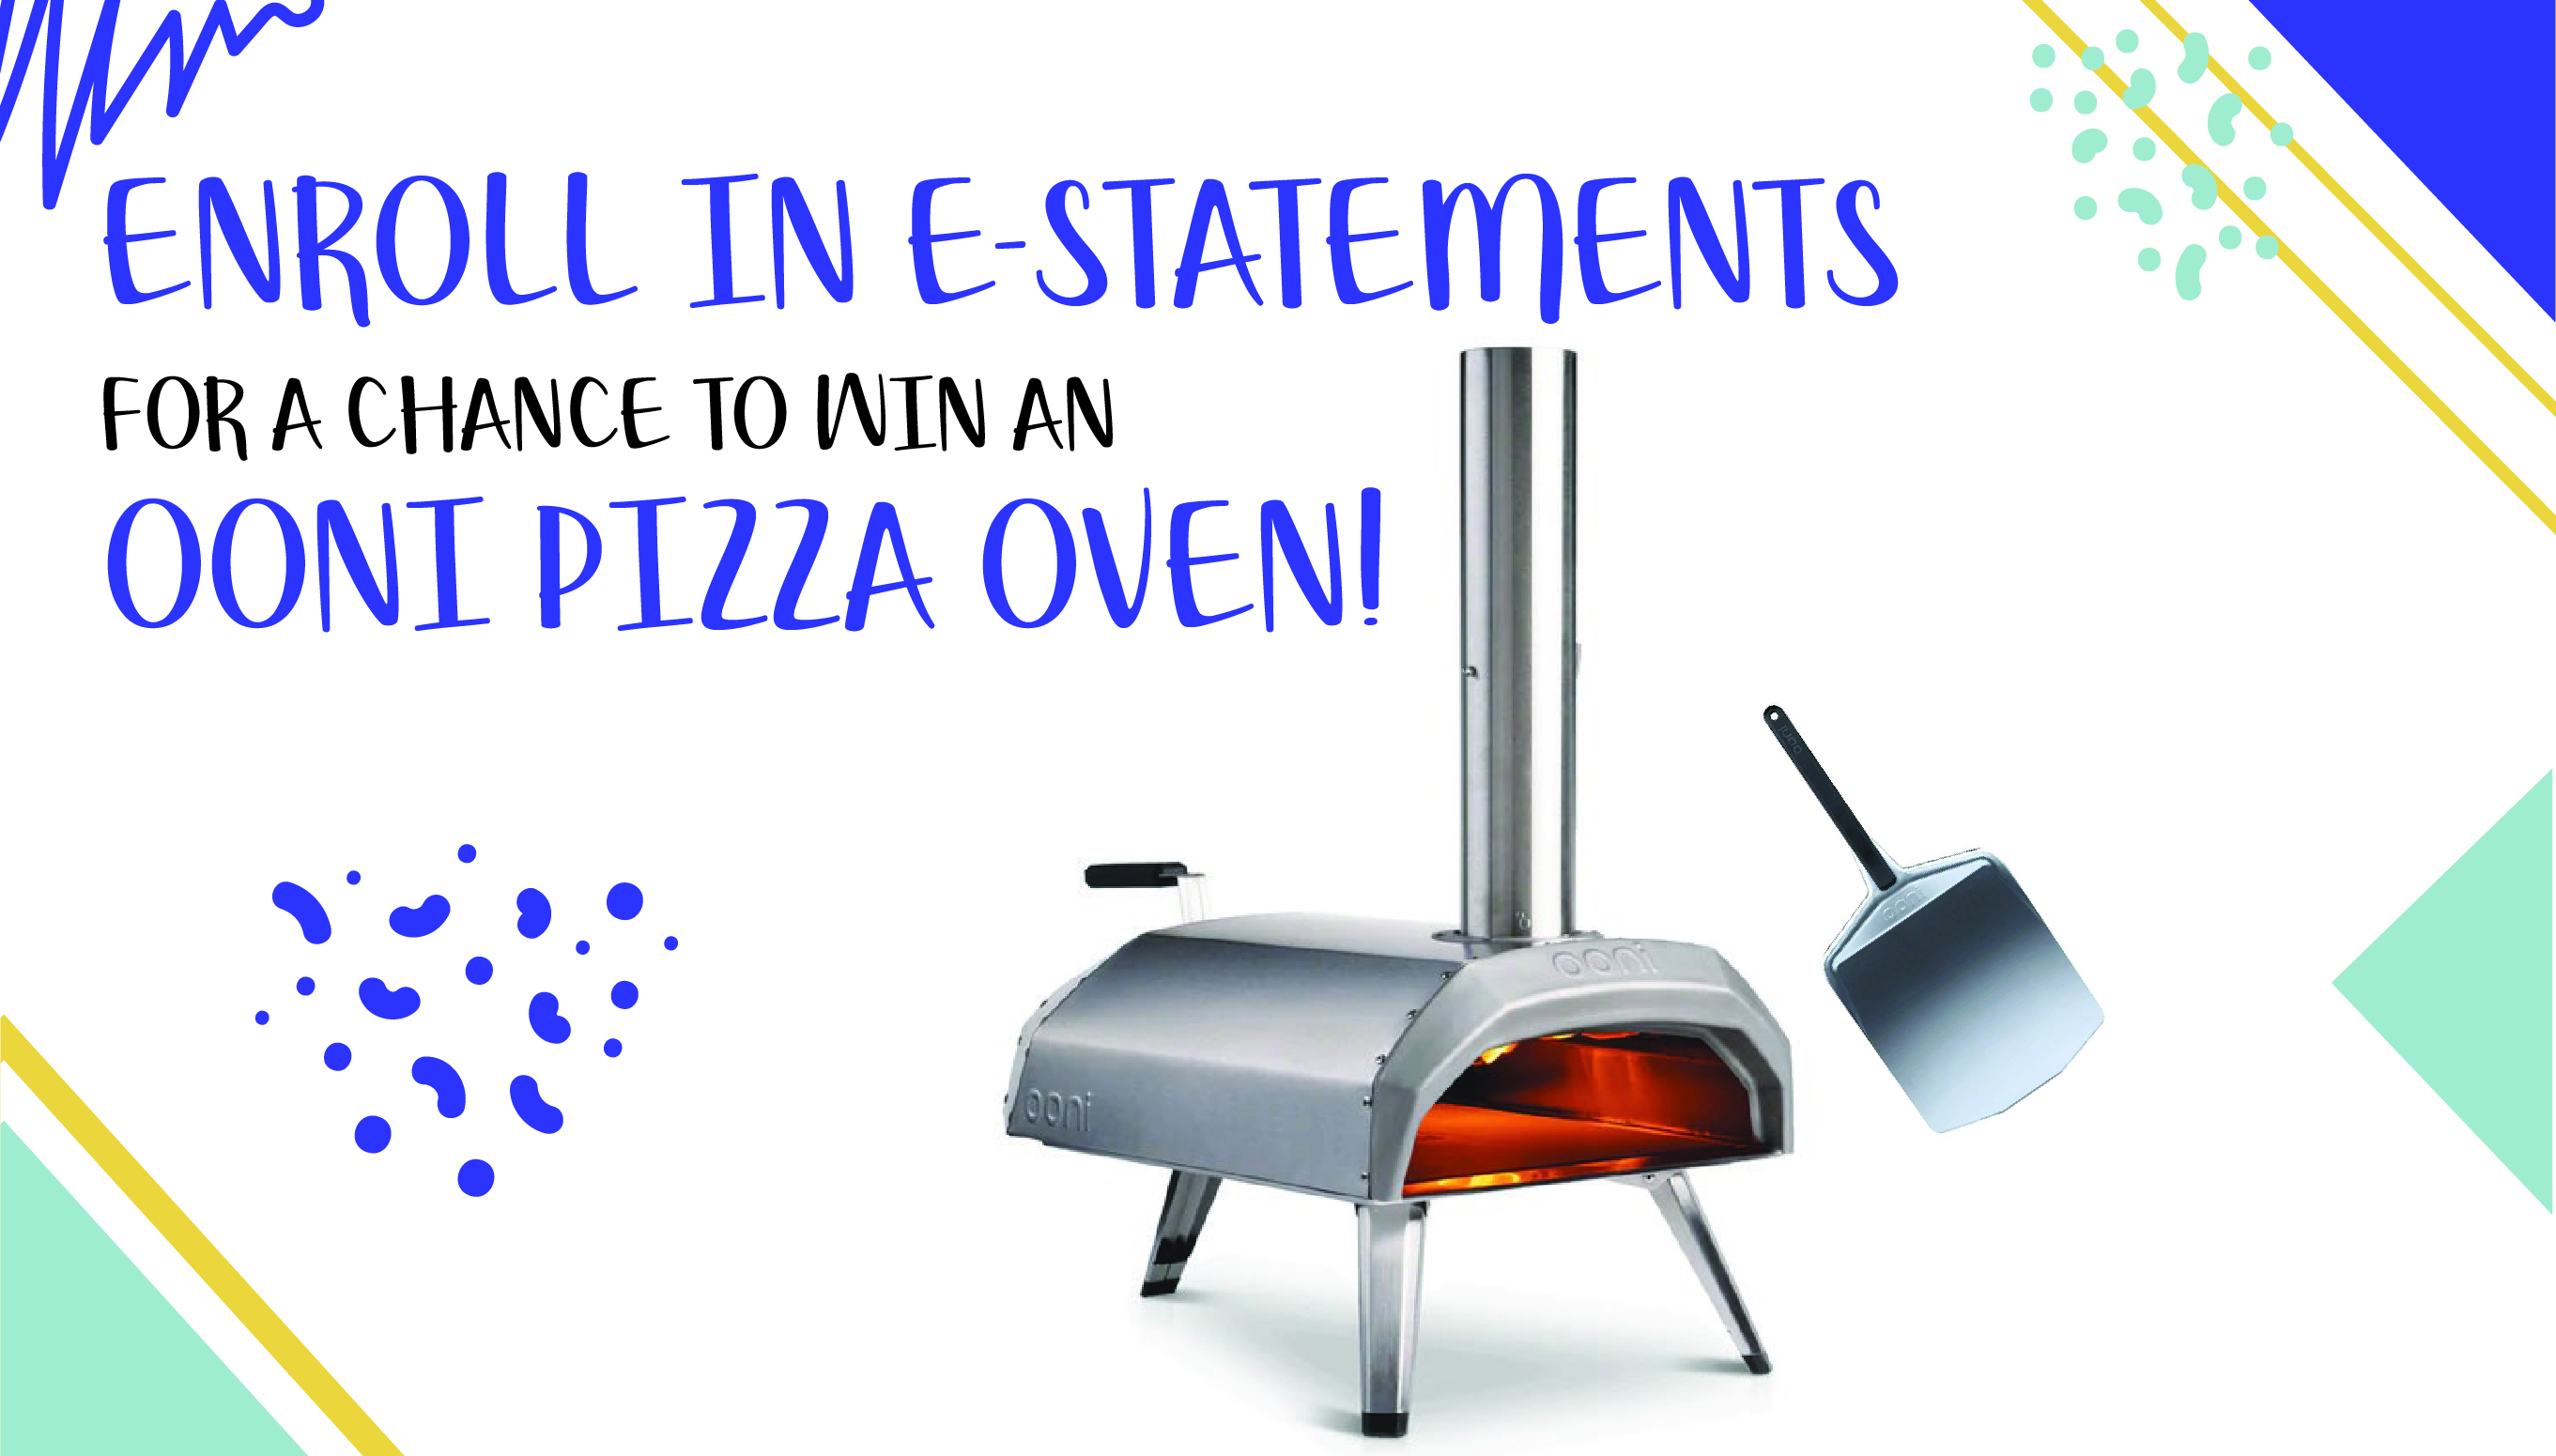 OONI Pizza Oven